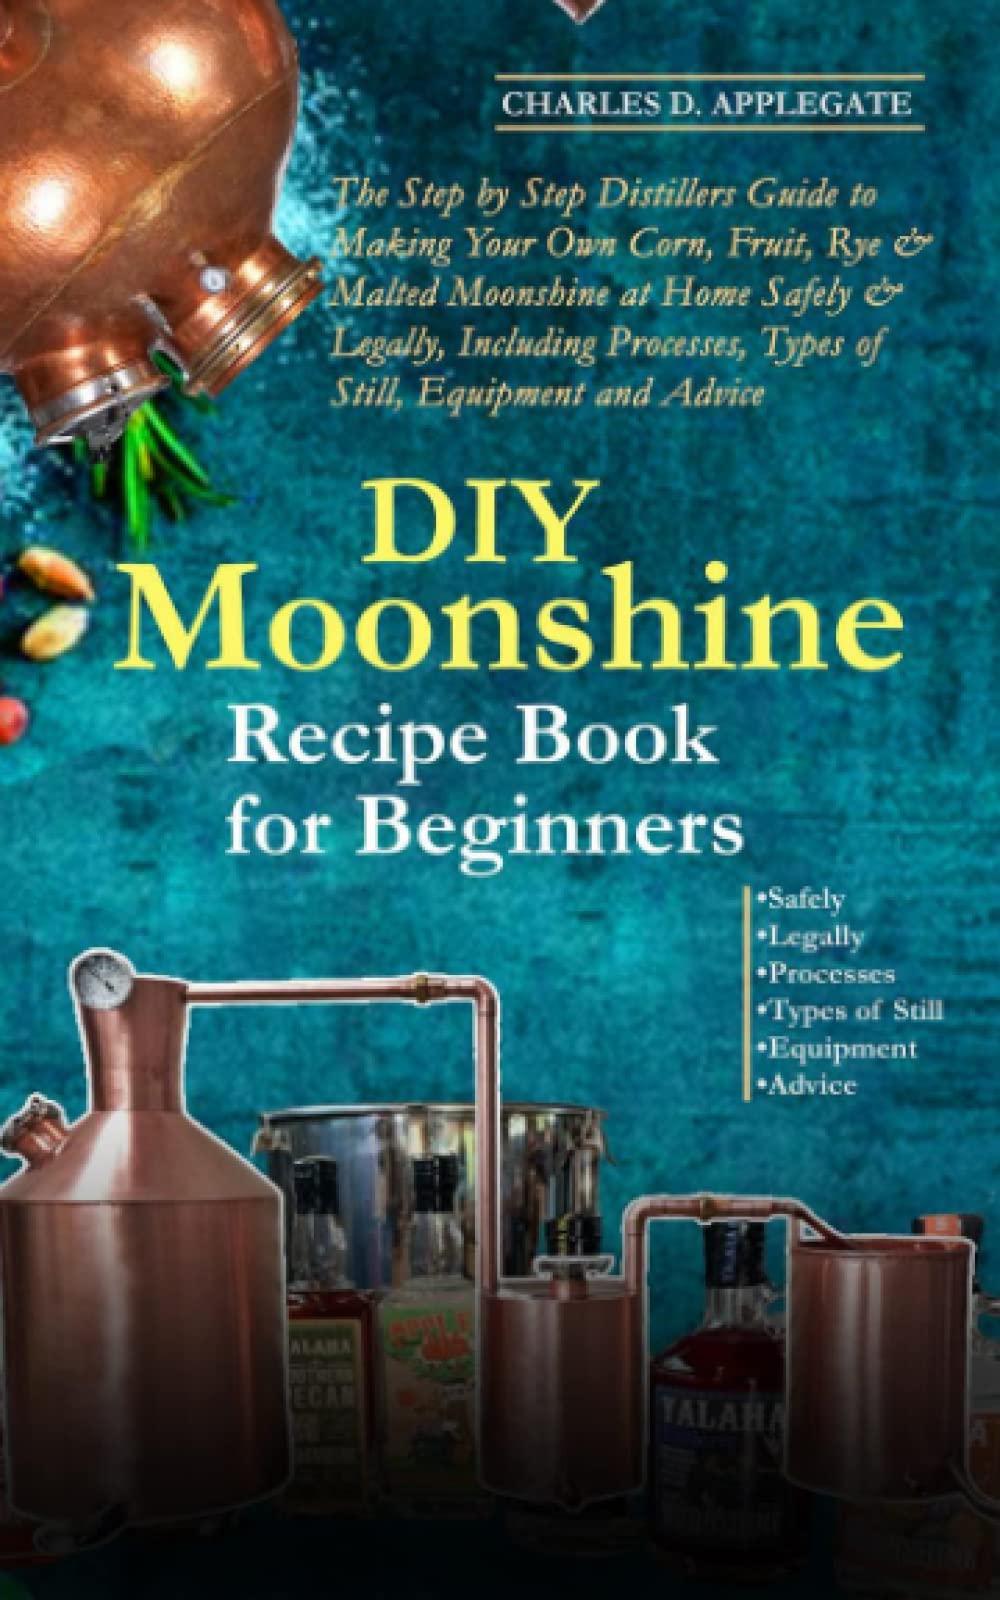 DIY Moonshine Recipe Book for Beginners: Distillers Guide to Making Your Own Corn, Fruit, Rye & Malted Moonshine at Home Safely & Legally, Including Processes, Types of Still, Equipment and Advice